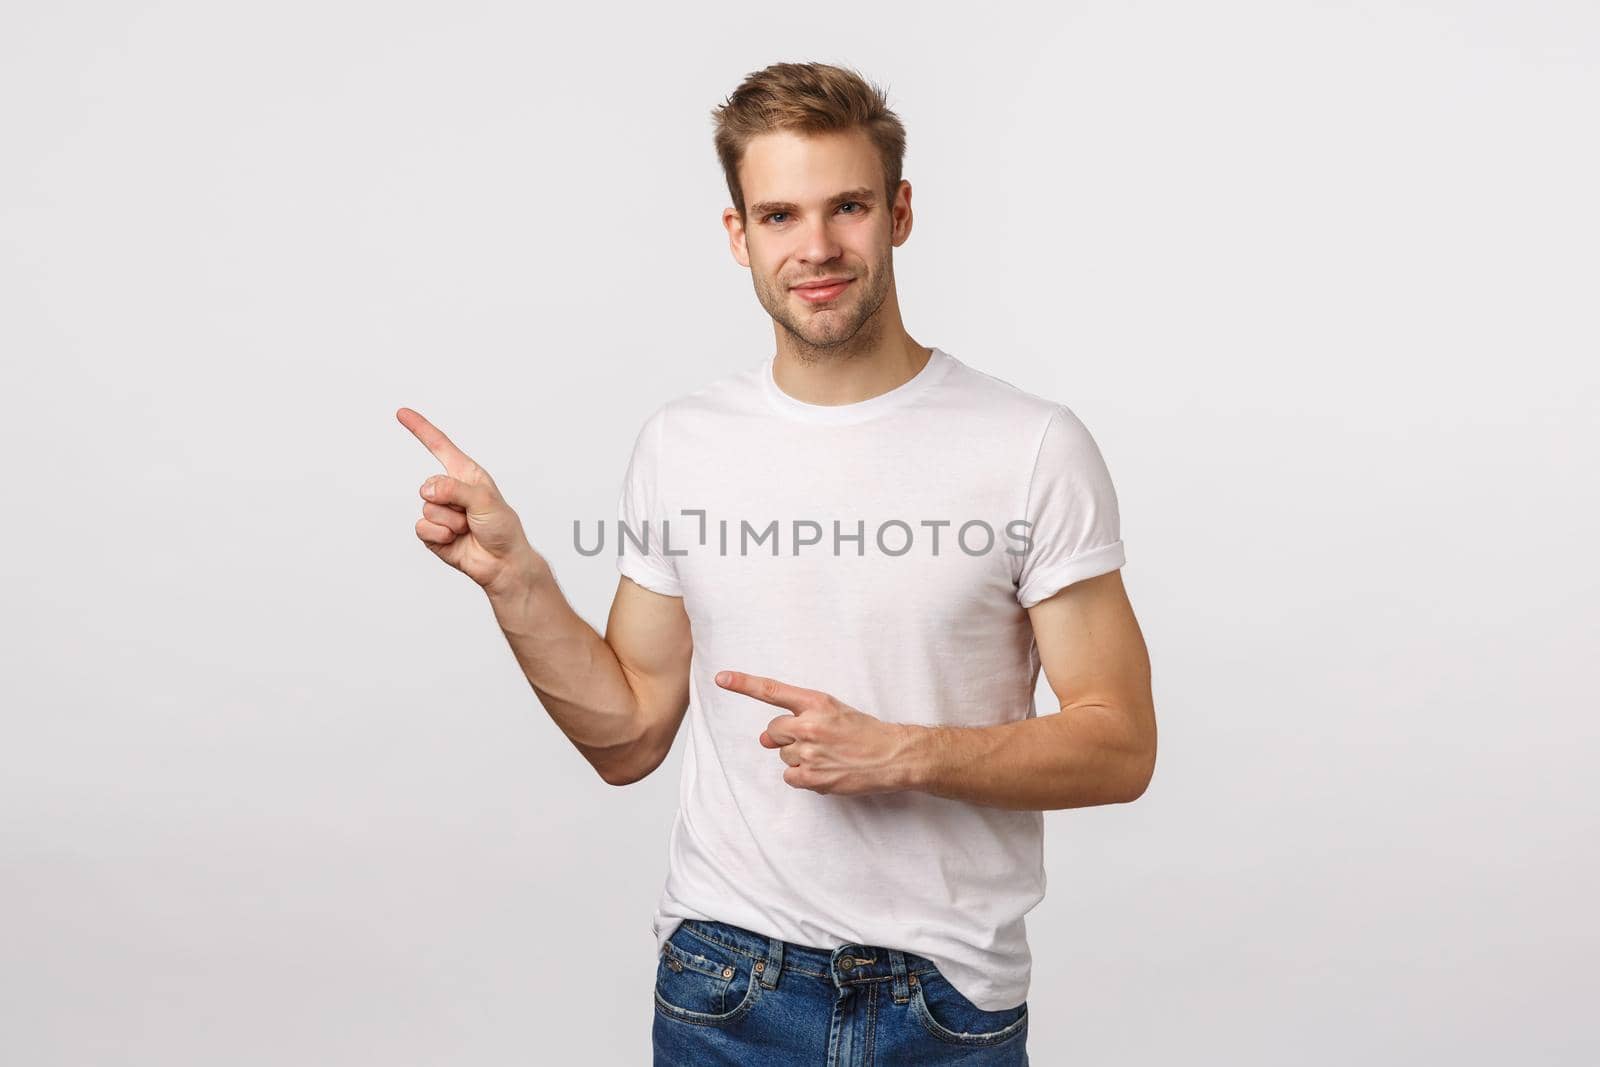 Handsome, assertive pleased young blond man with bristle, pointing upper left corner, smiling as looking partner, discuss business concepts, suggest product, recommend place, white background.